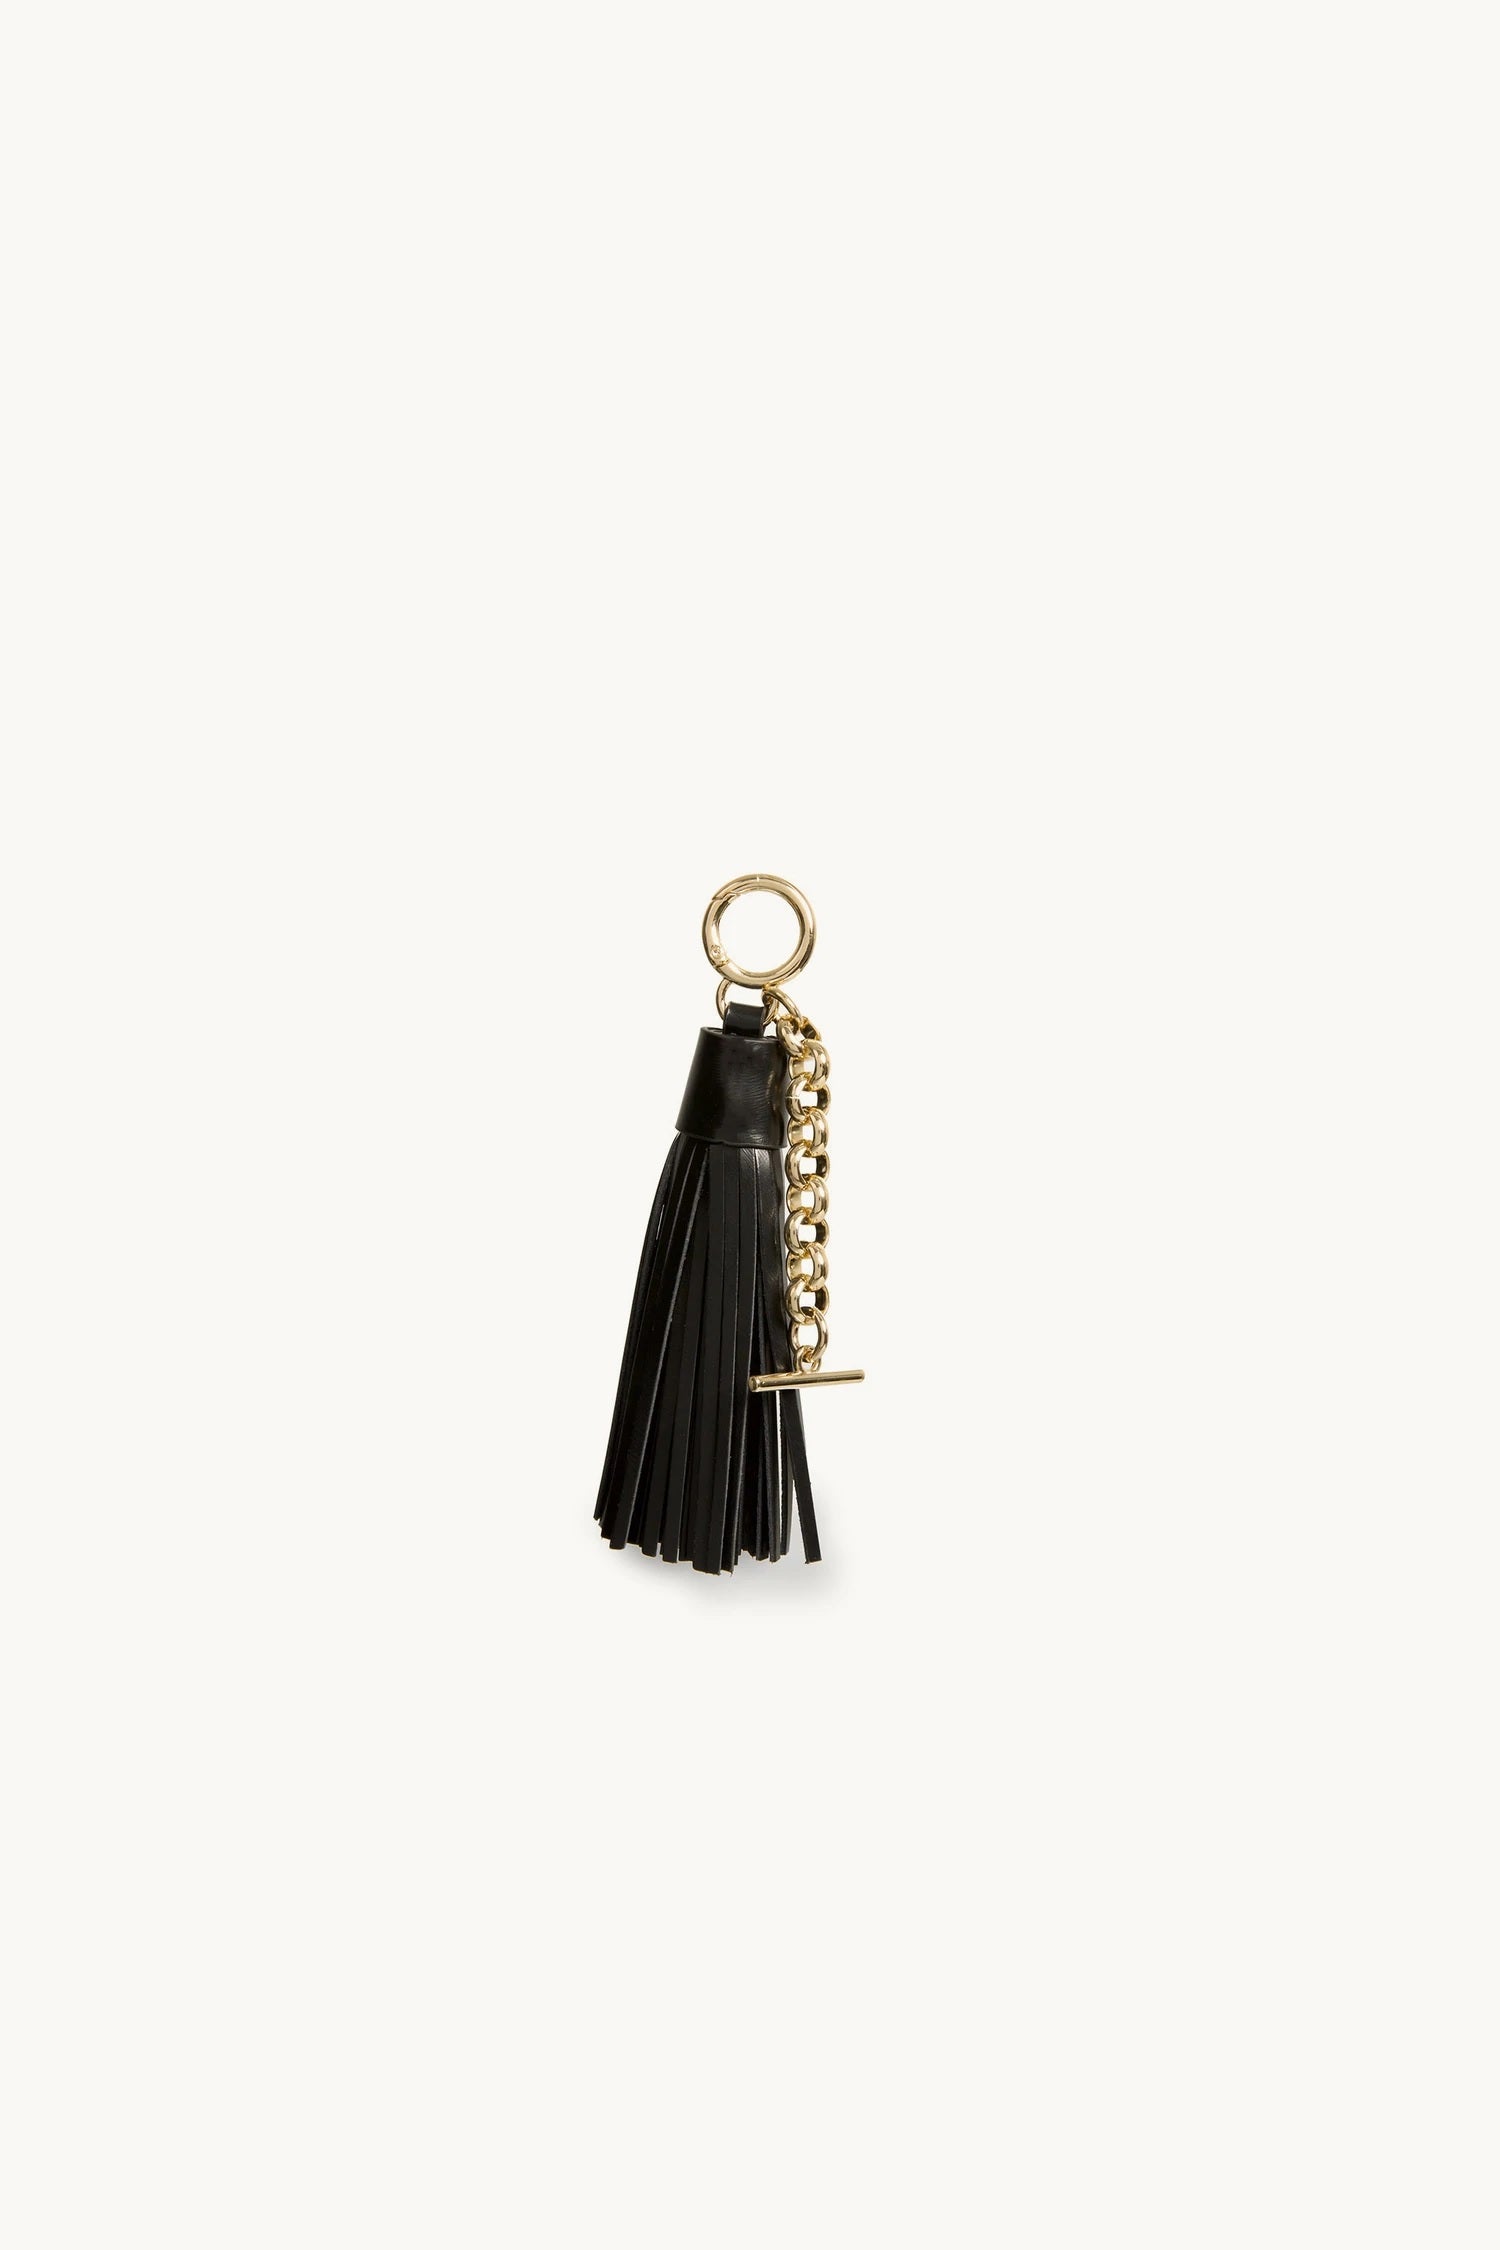 Dylan Kain The Harlow Lux Keychain Black/Light Gold